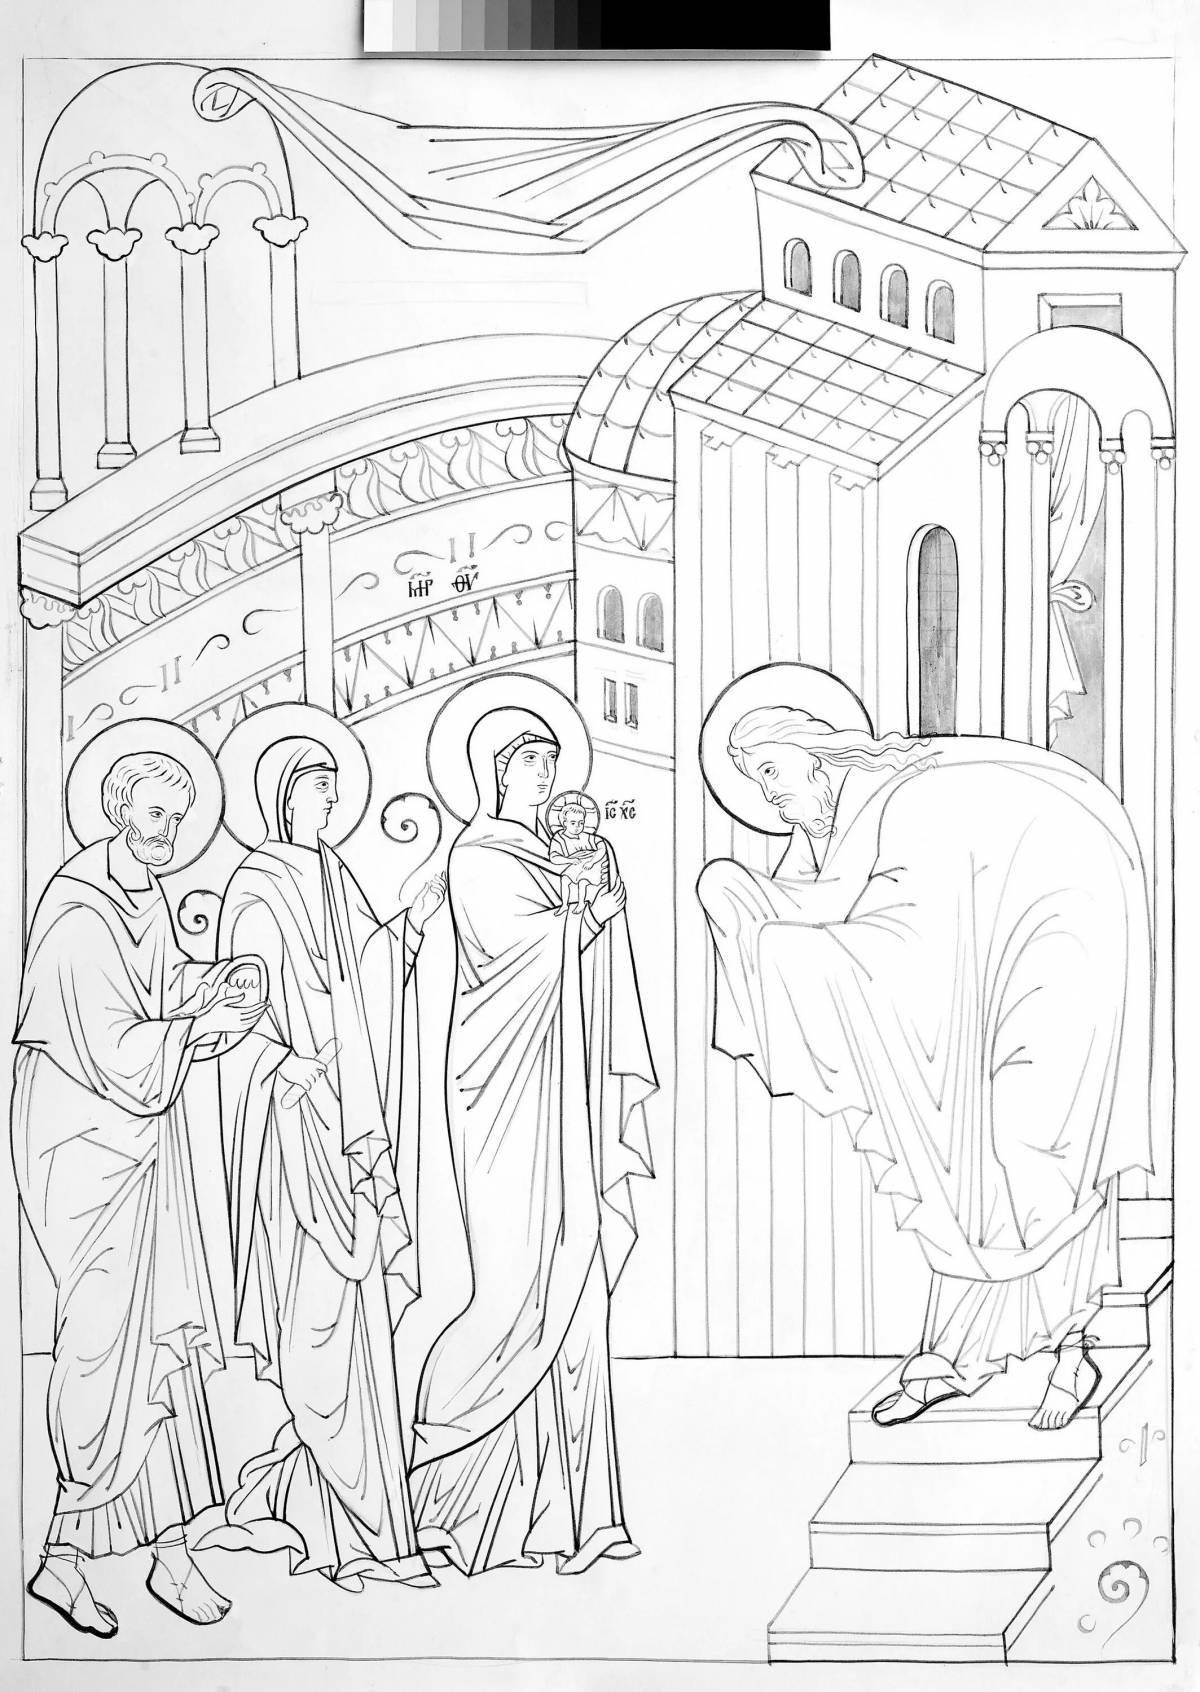 Great candlemas coloring book